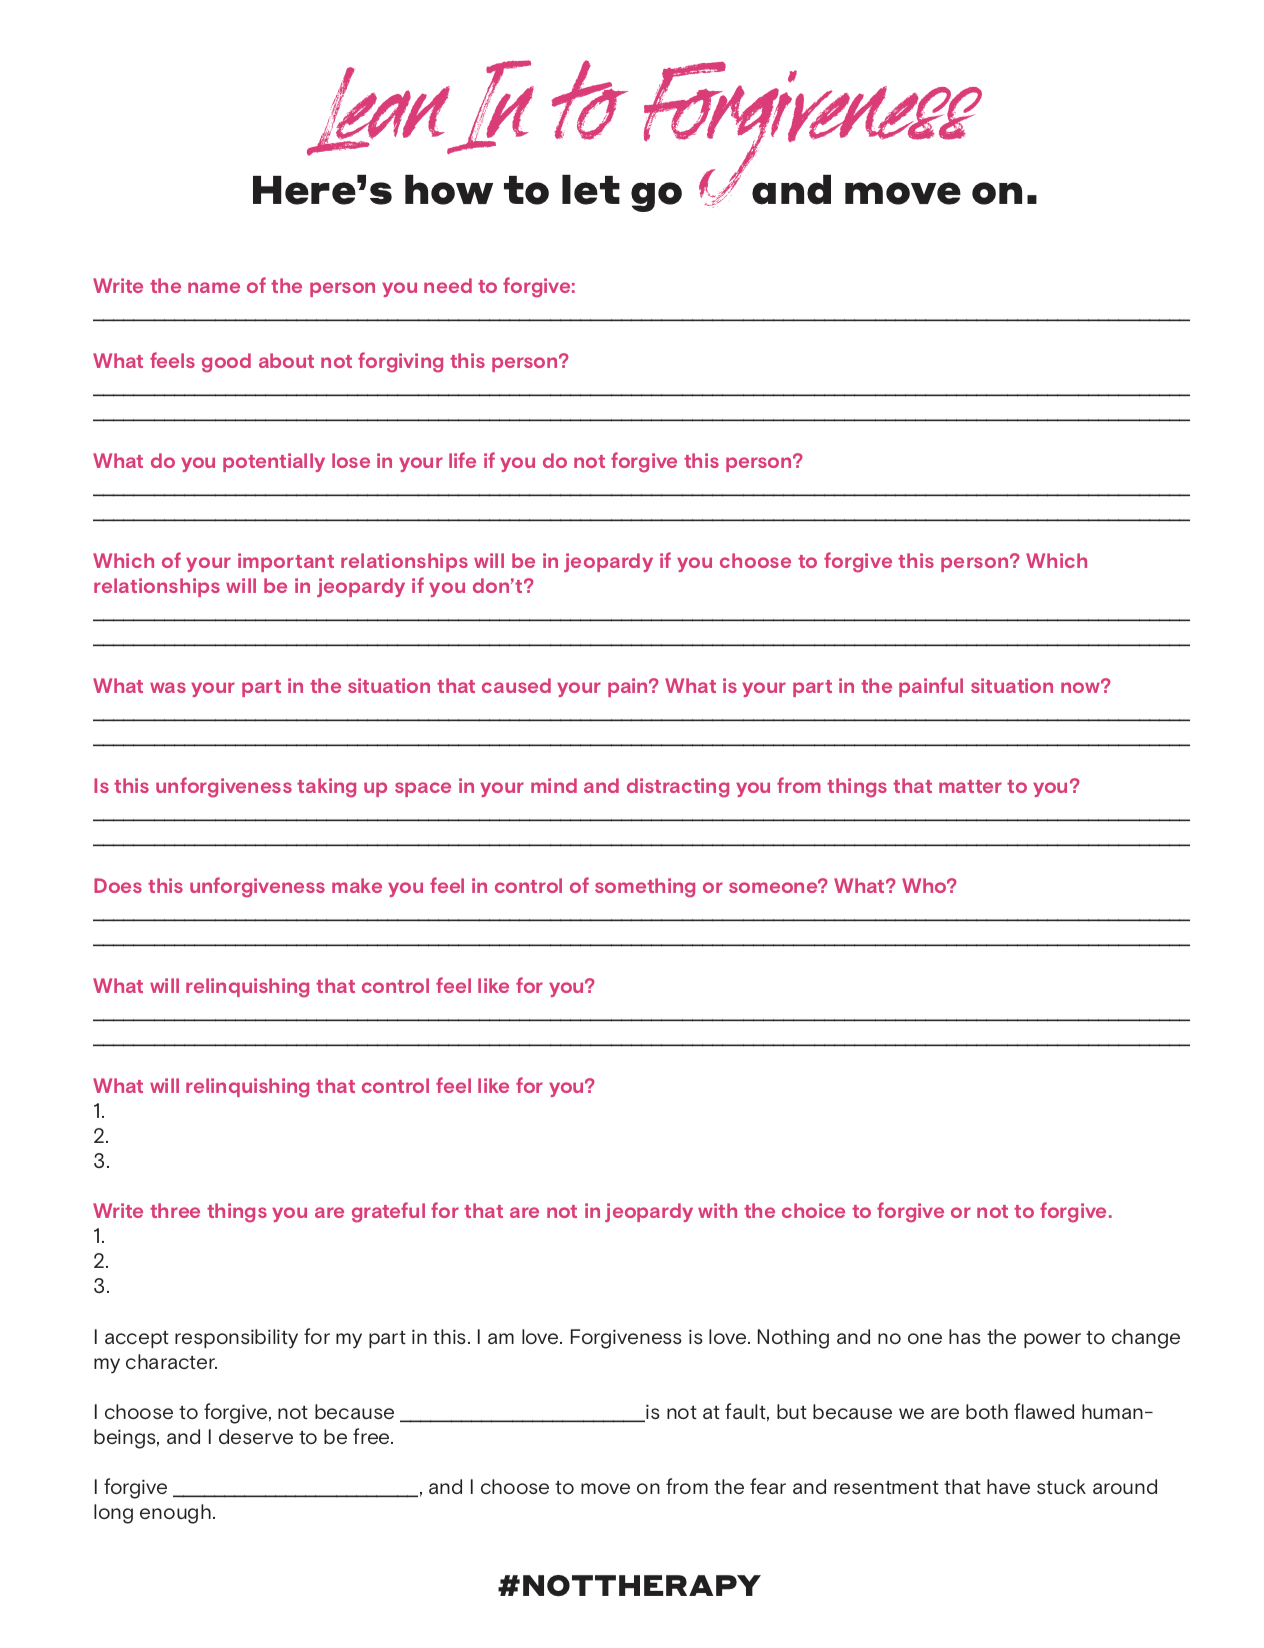 letting-go-of-resentment-worksheet